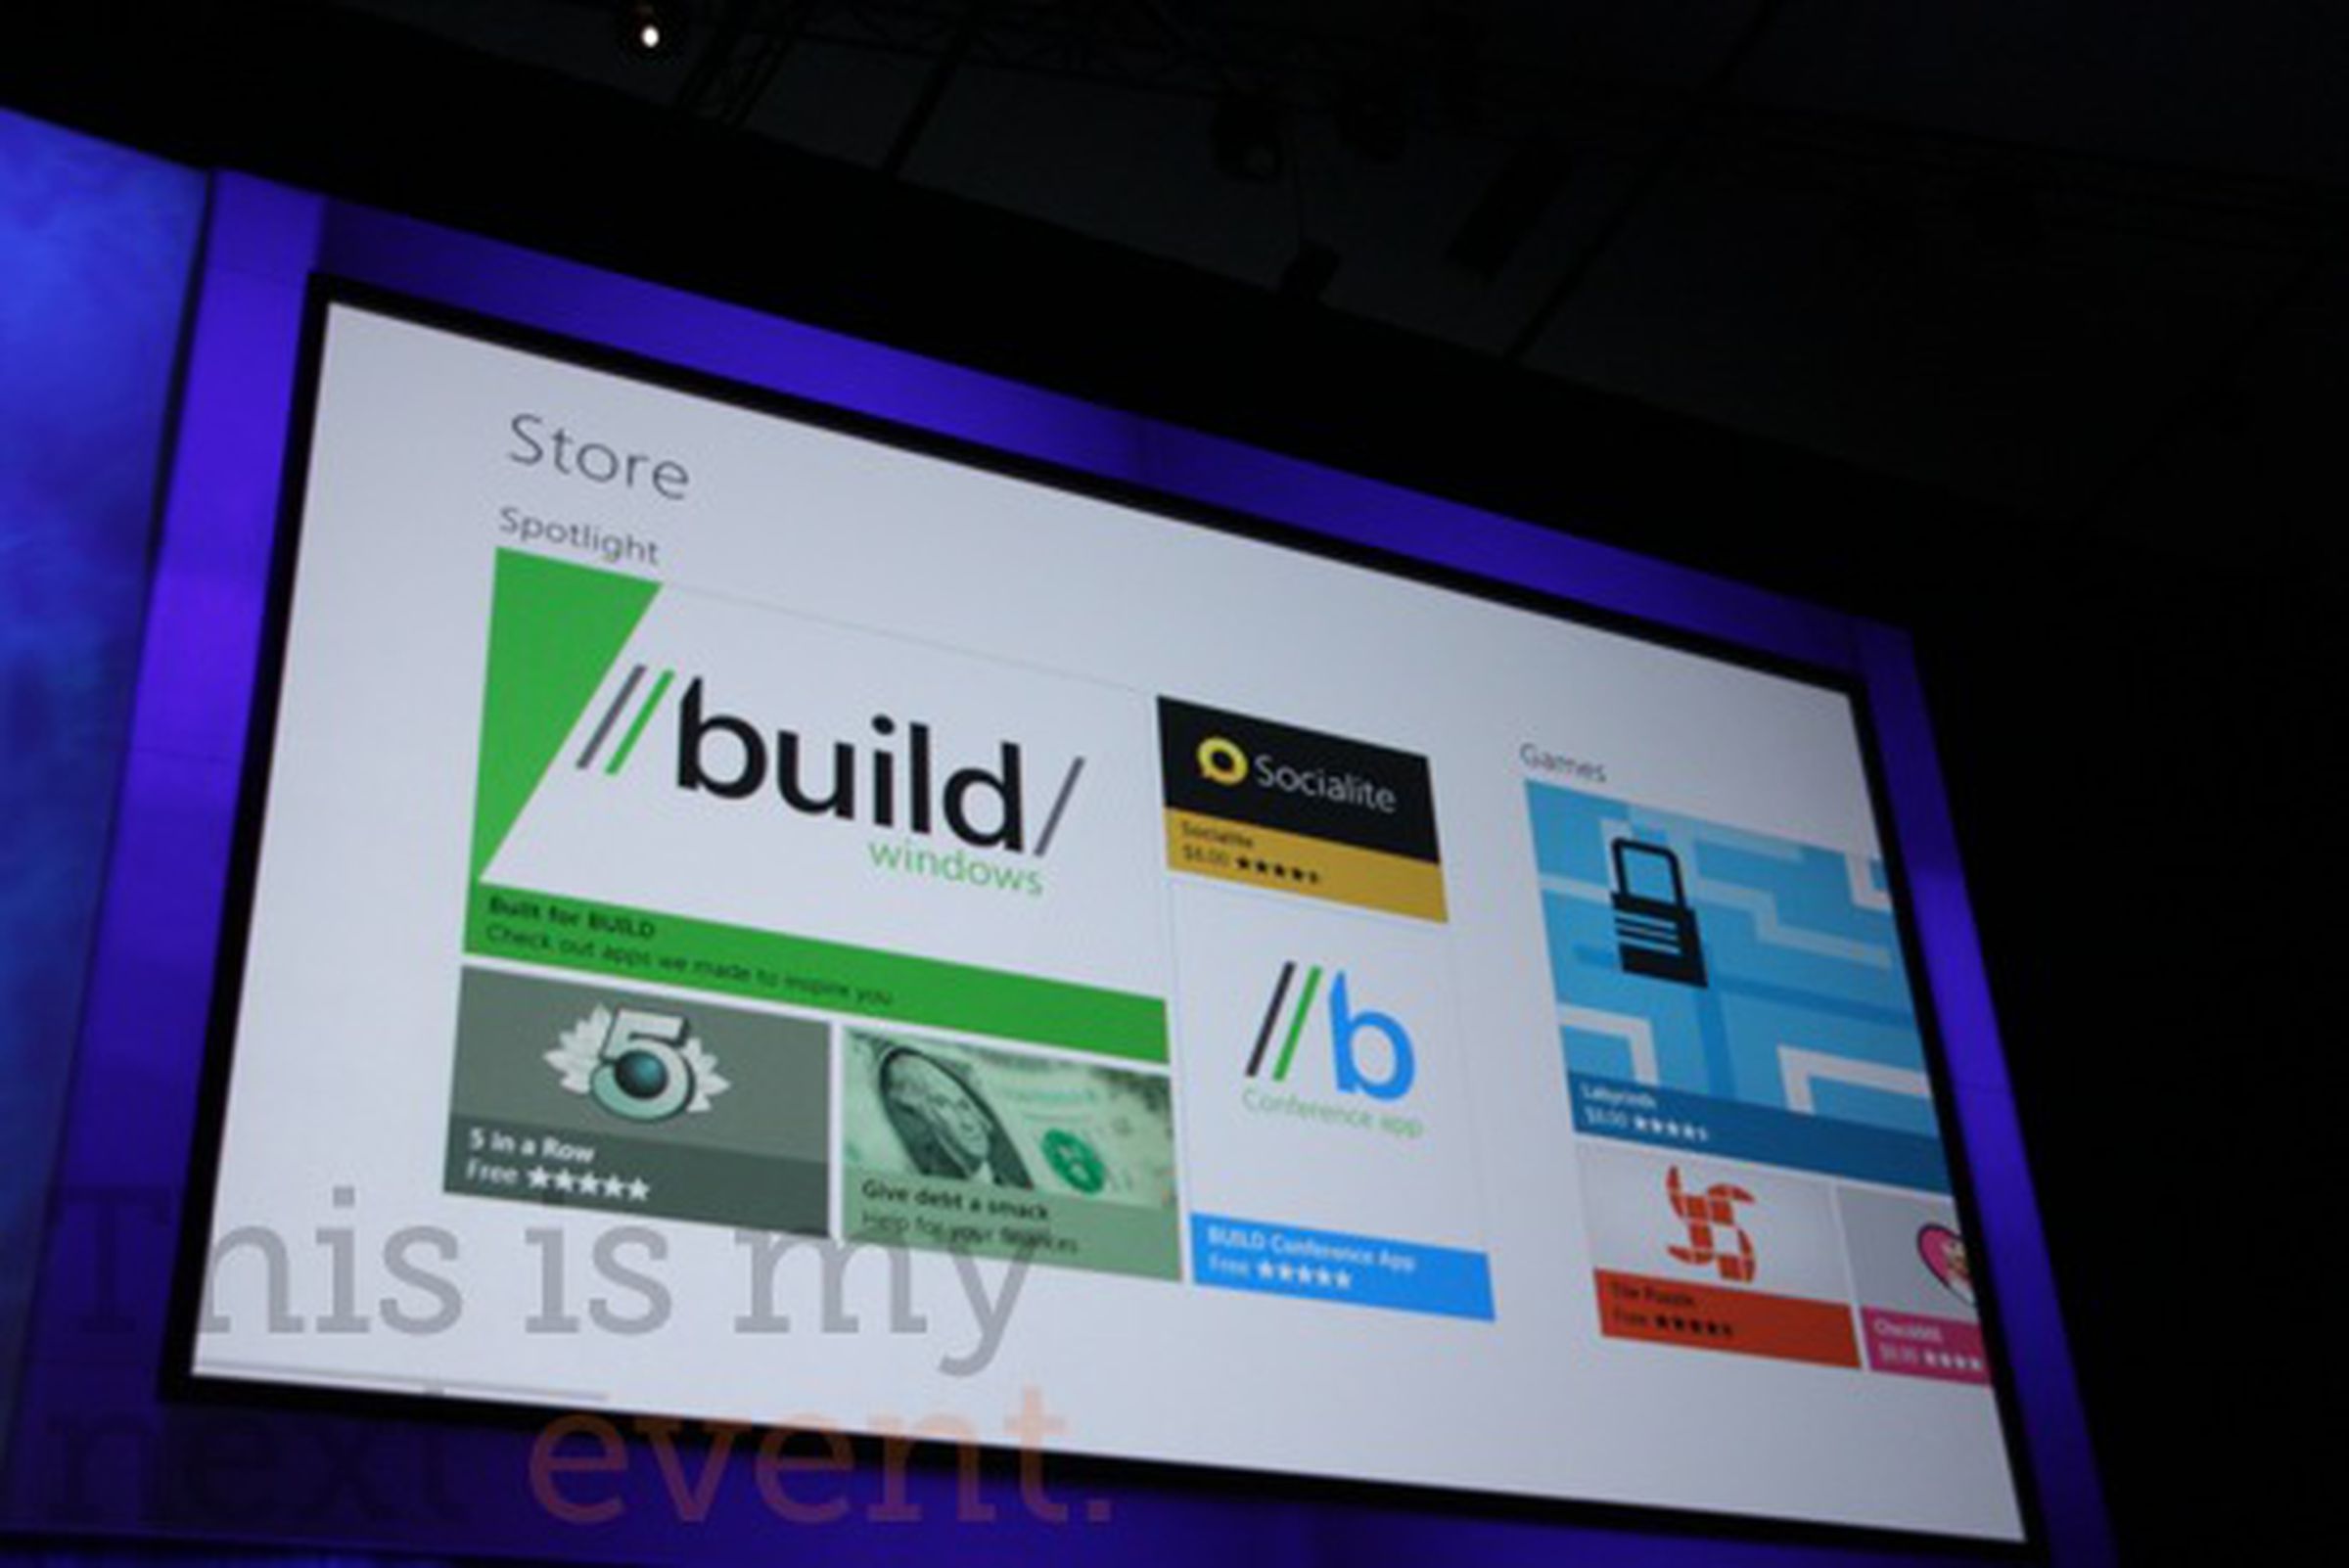 Microsoft releases Windows 8 Developer Preview, announces Windows Store (update: it’s out early!)